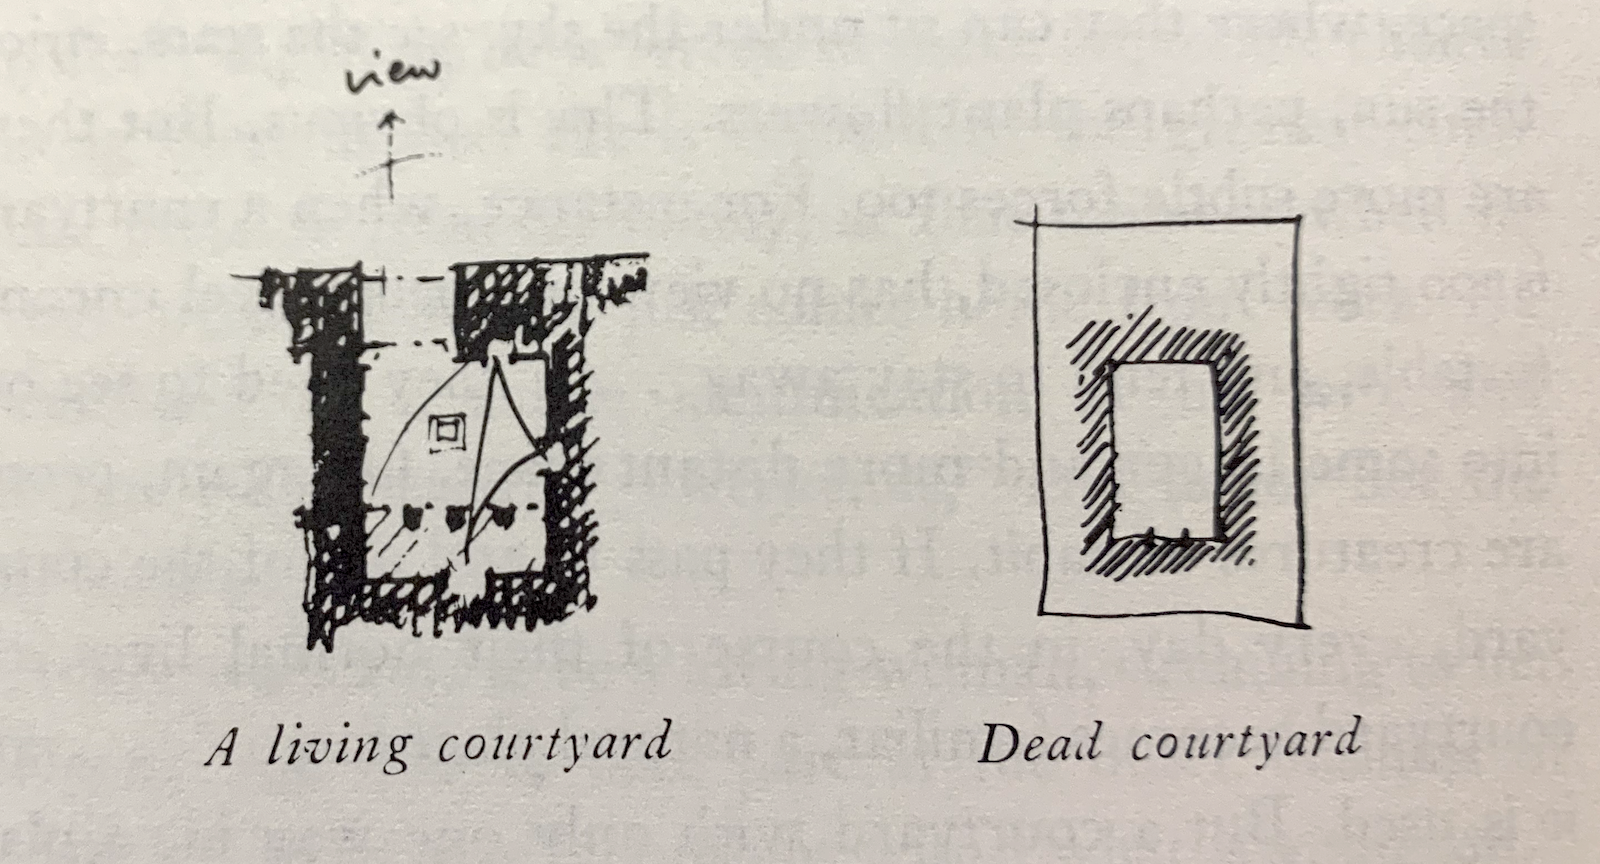 Alexander's example of a living courtyard vs. a dead one